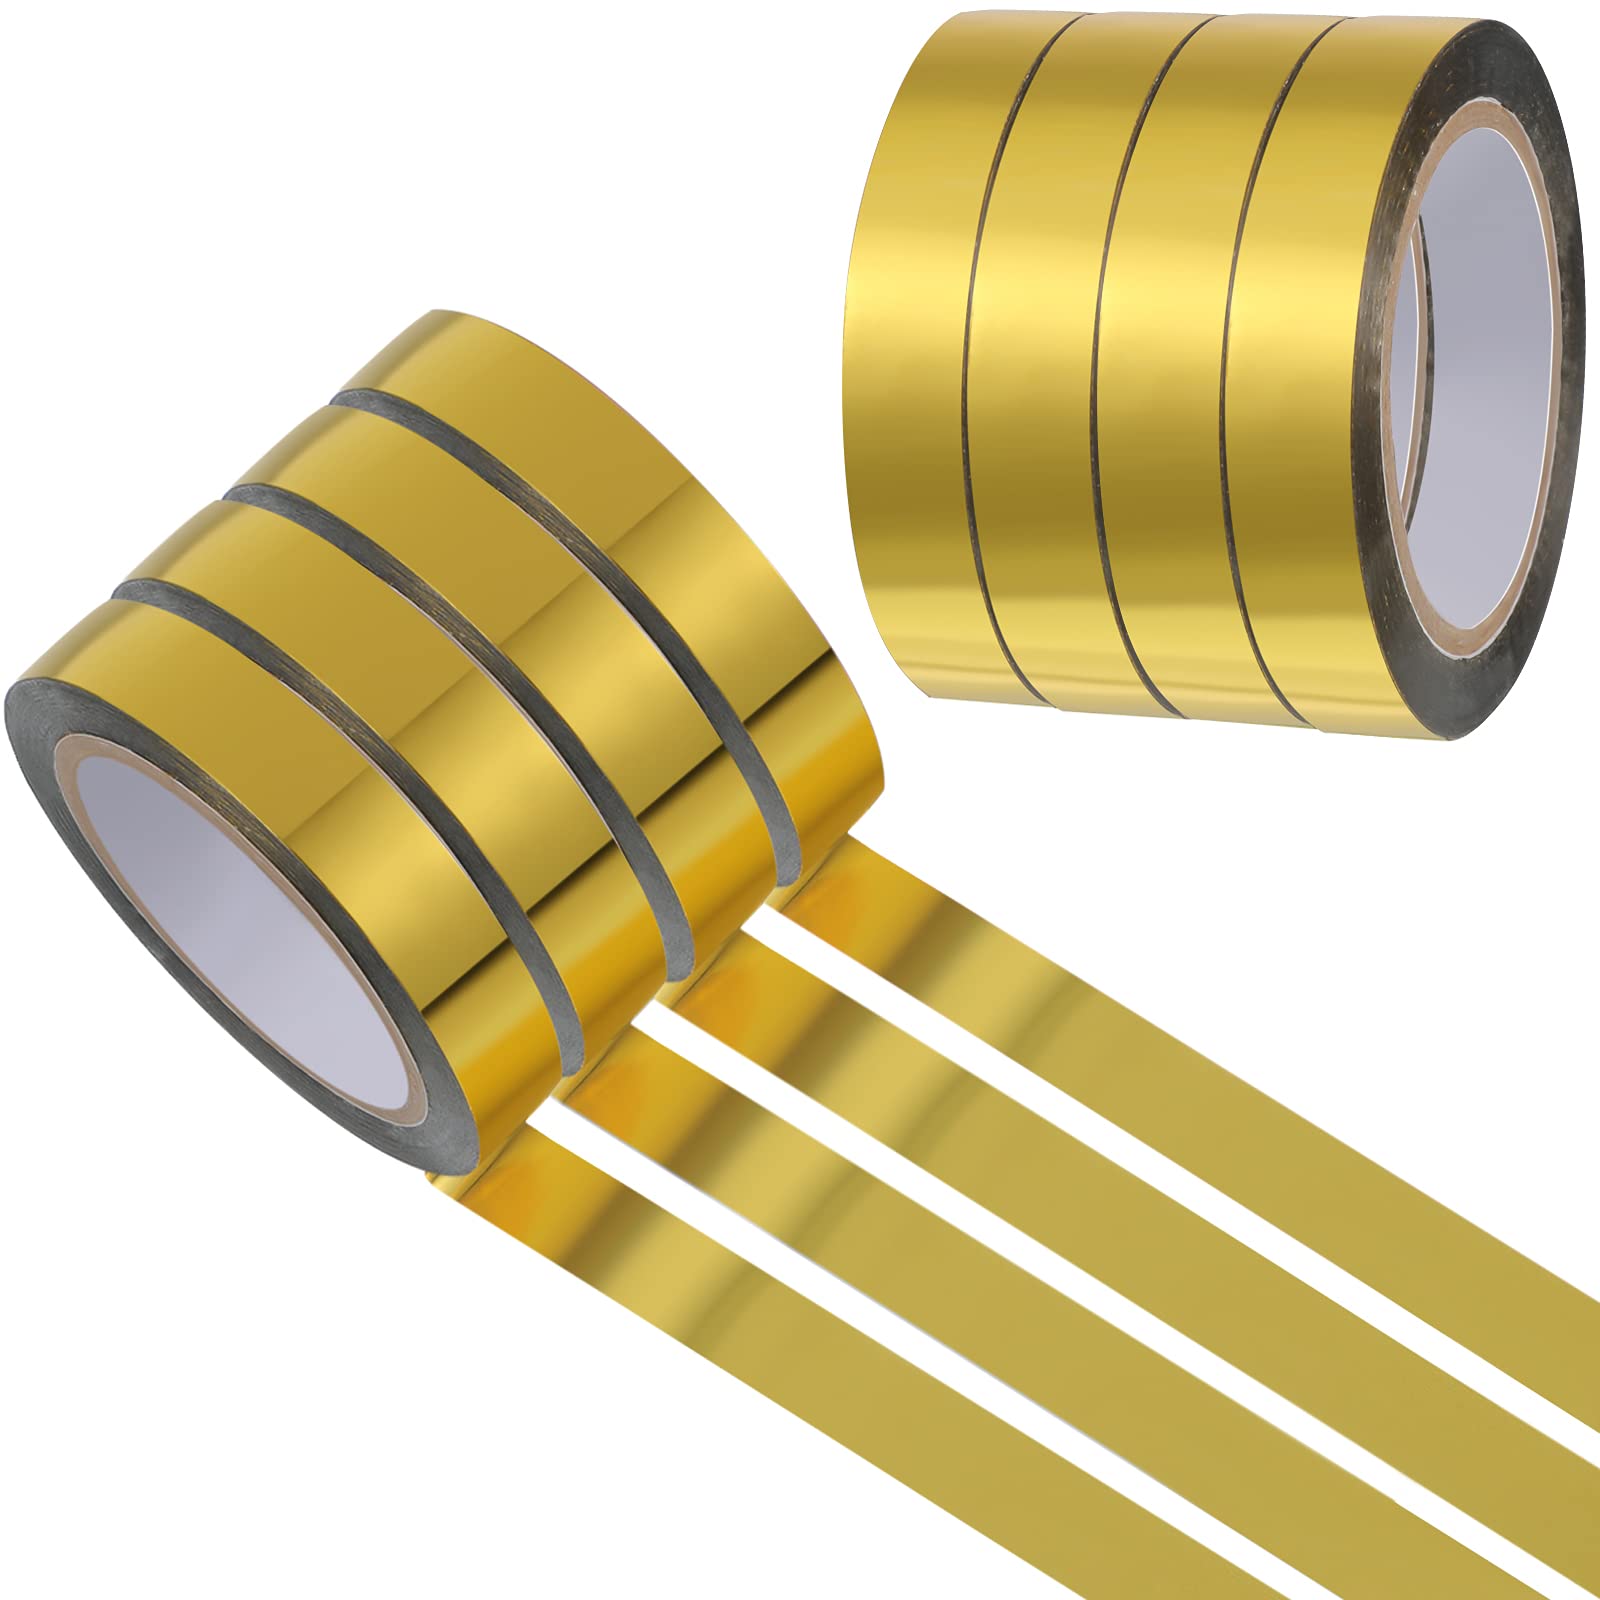 Metallic Tape Mirror Tape Duct Tape Diy Decorative Tapes, 2.4 Inches X 55  Yard